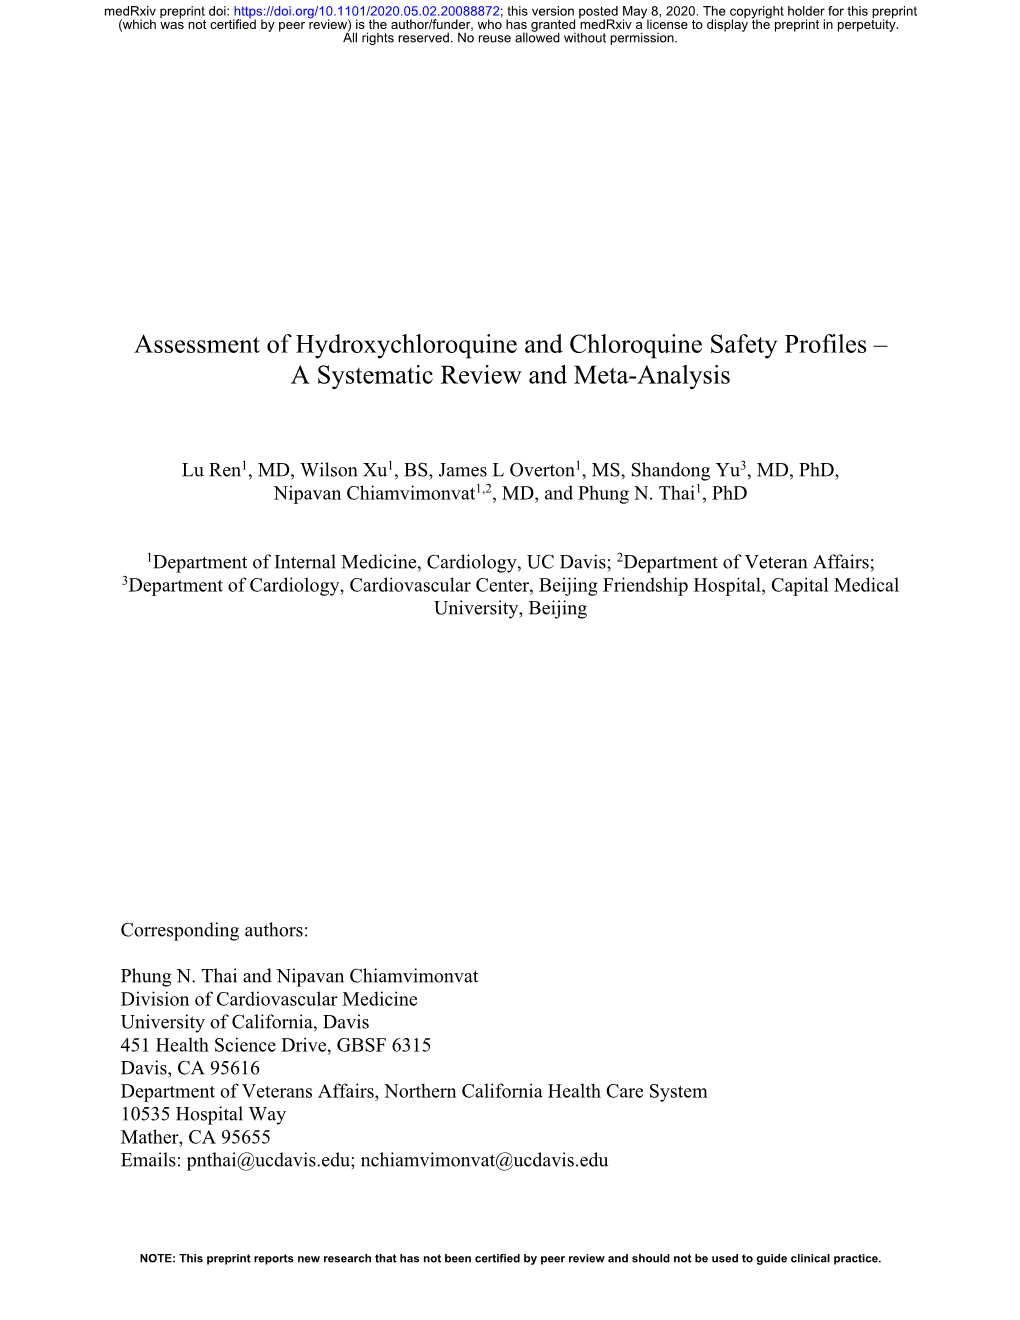 Assessment of Hydroxychloroquine and Chloroquine Safety Profiles – a Systematic Review and Meta-Analysis